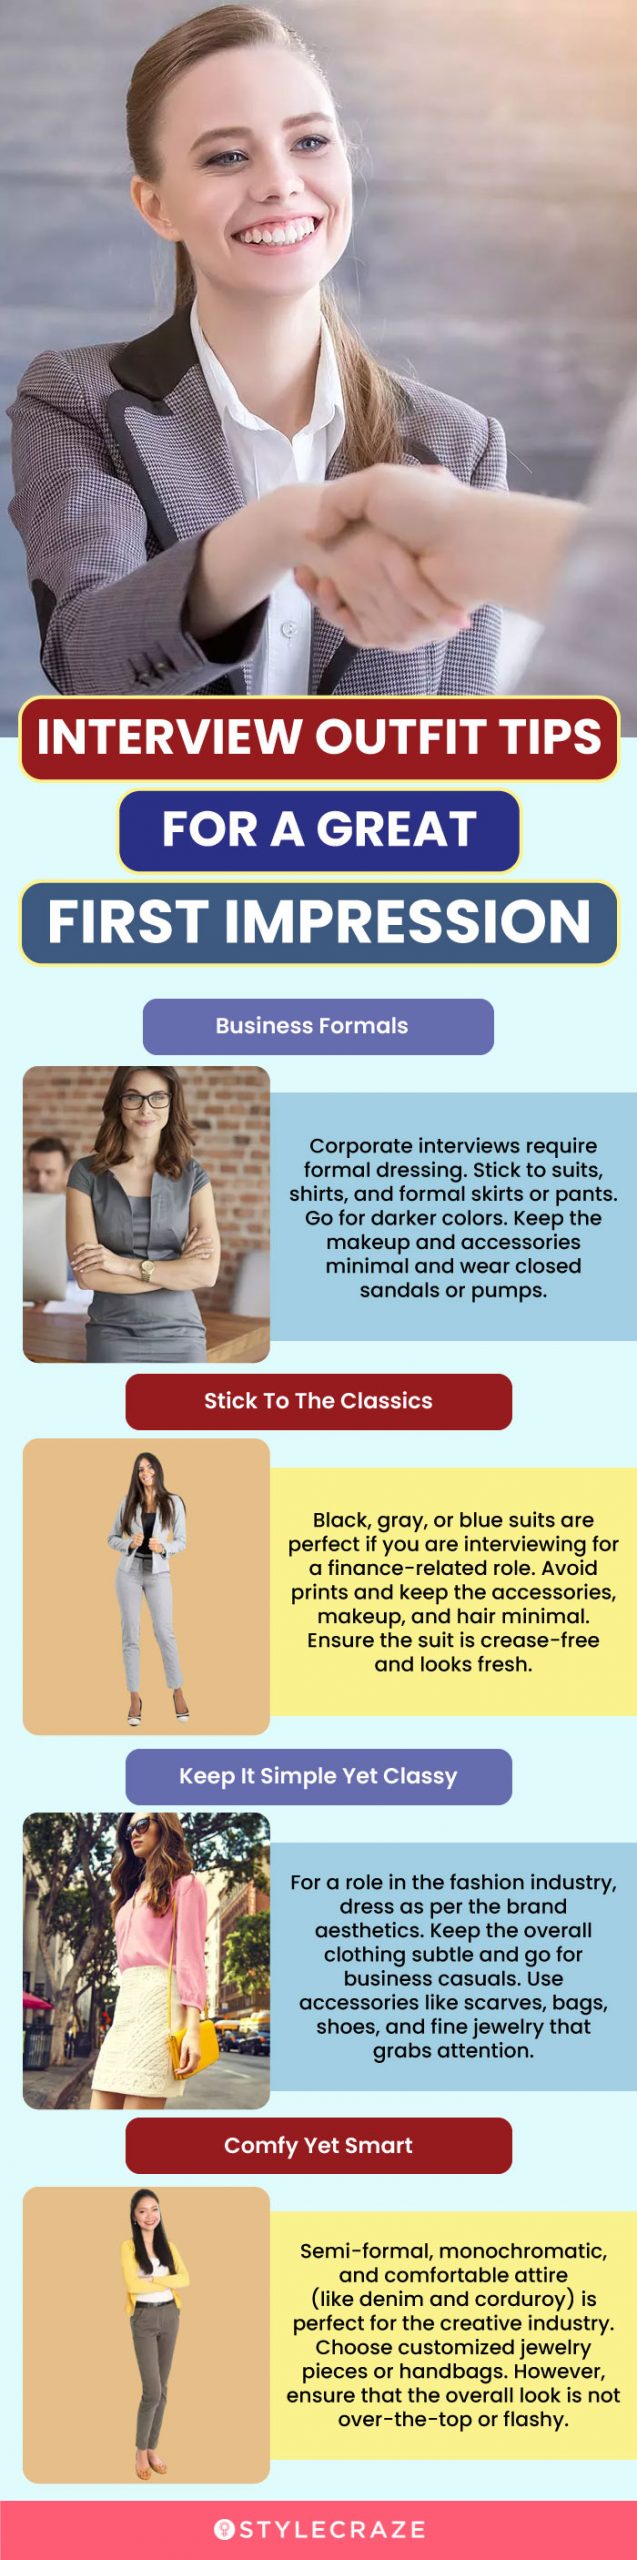 How to dress for an interview? | Interview dress, Job interview outfit,  Interview